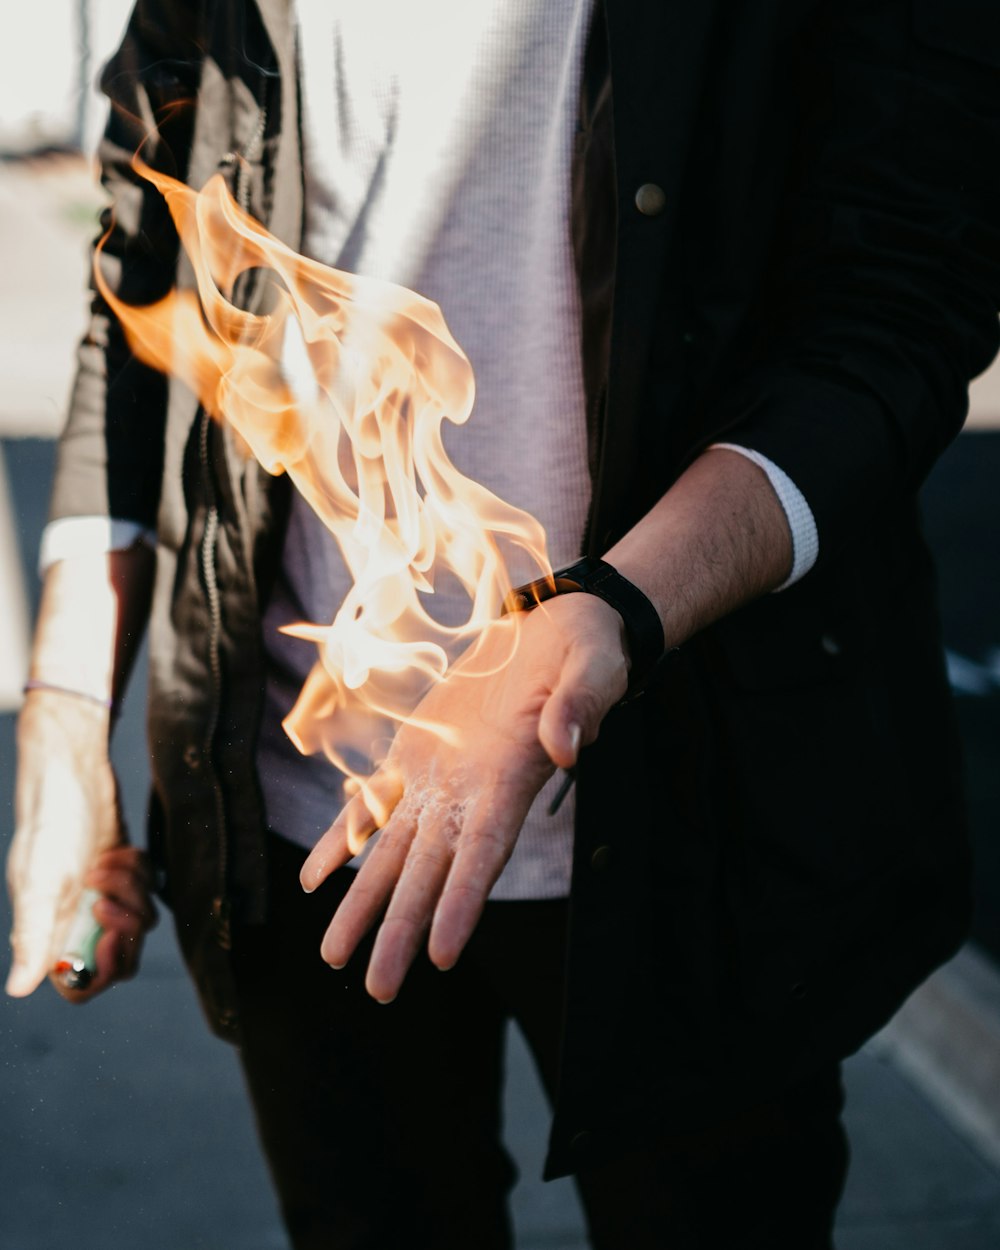 person with flaming hand